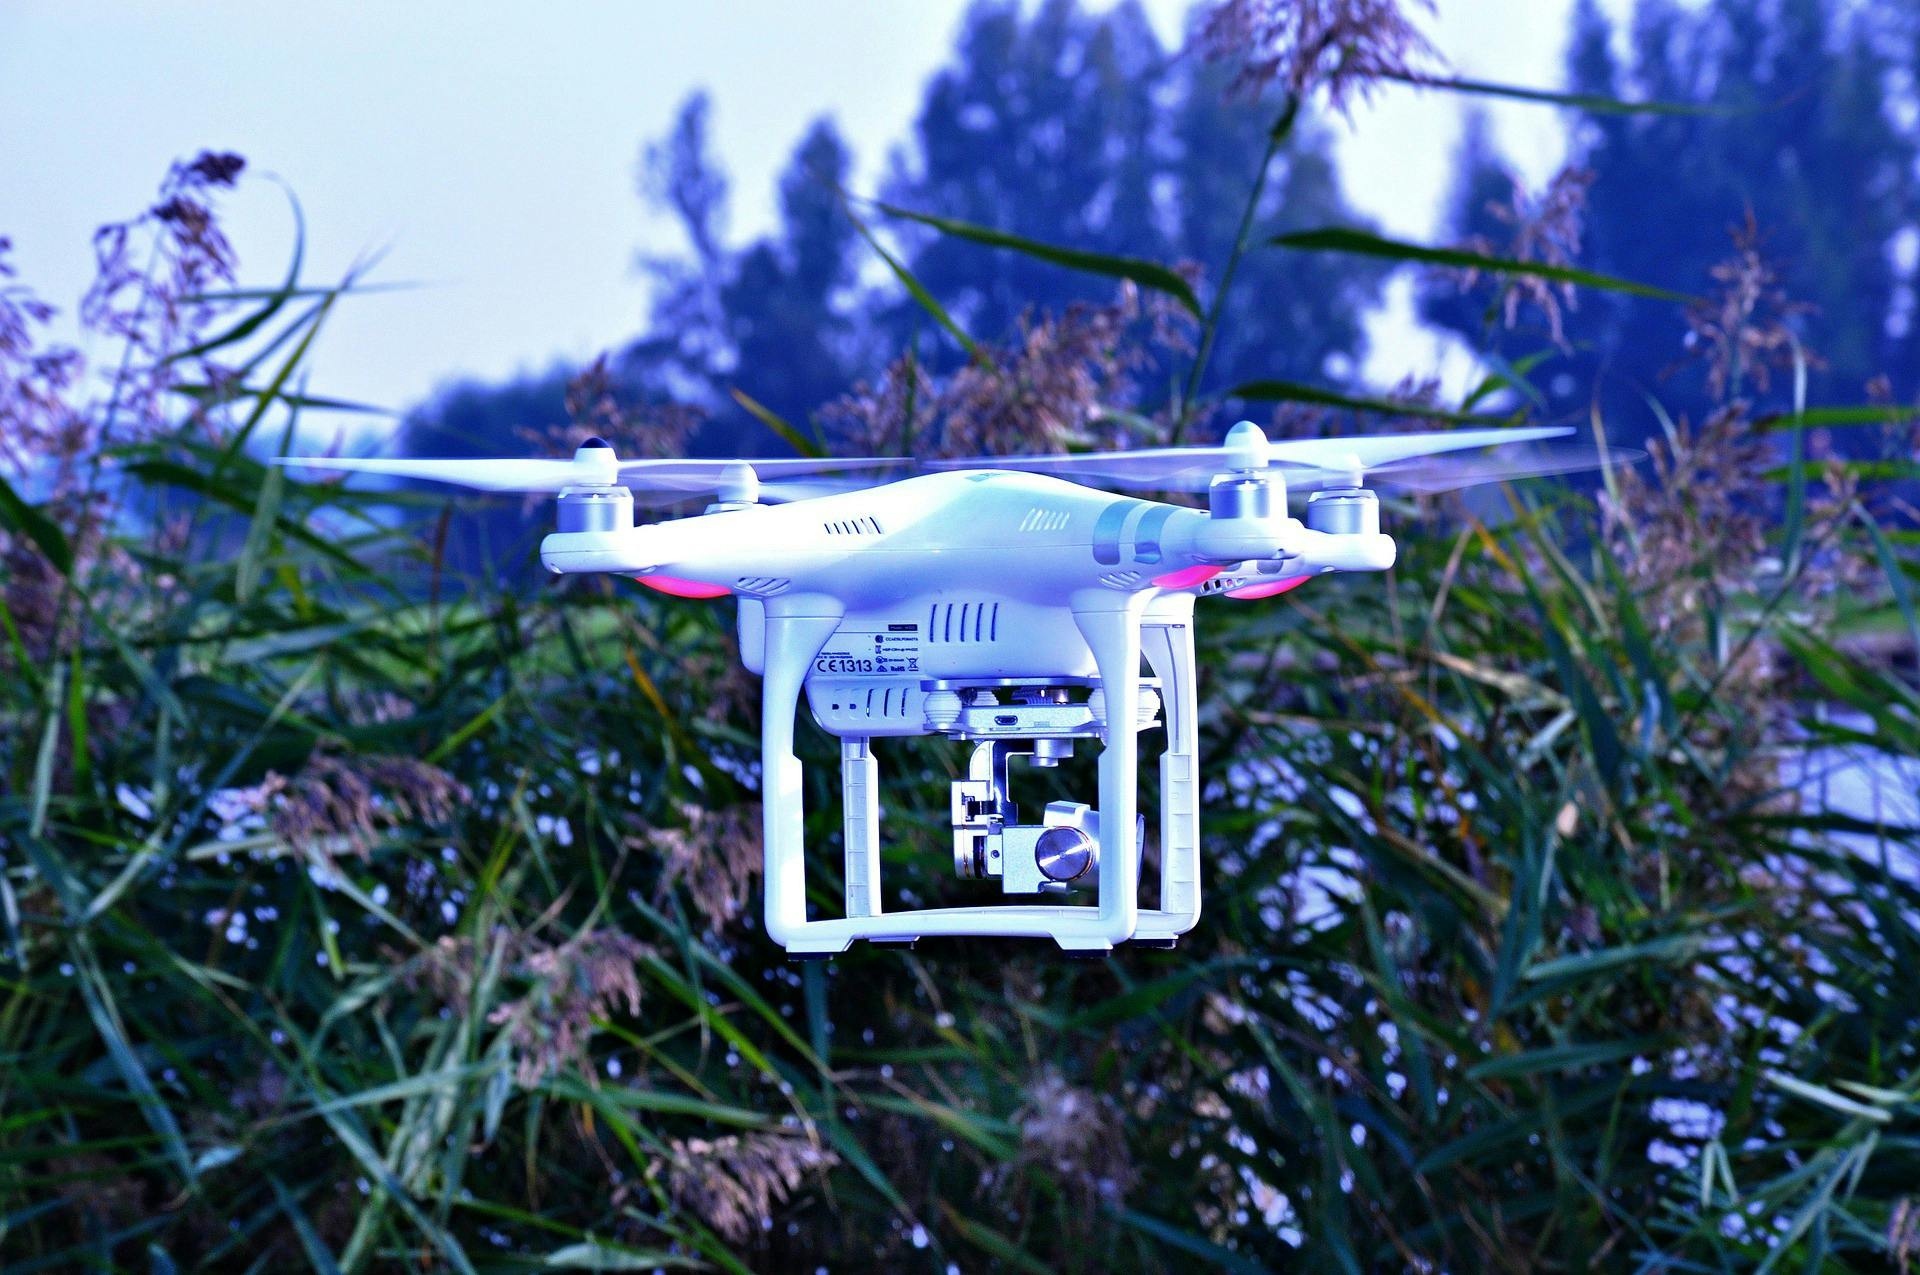 featured image - Pleasure and Business Merge, Here Are 5 Industries Drone Tech Is Transforming